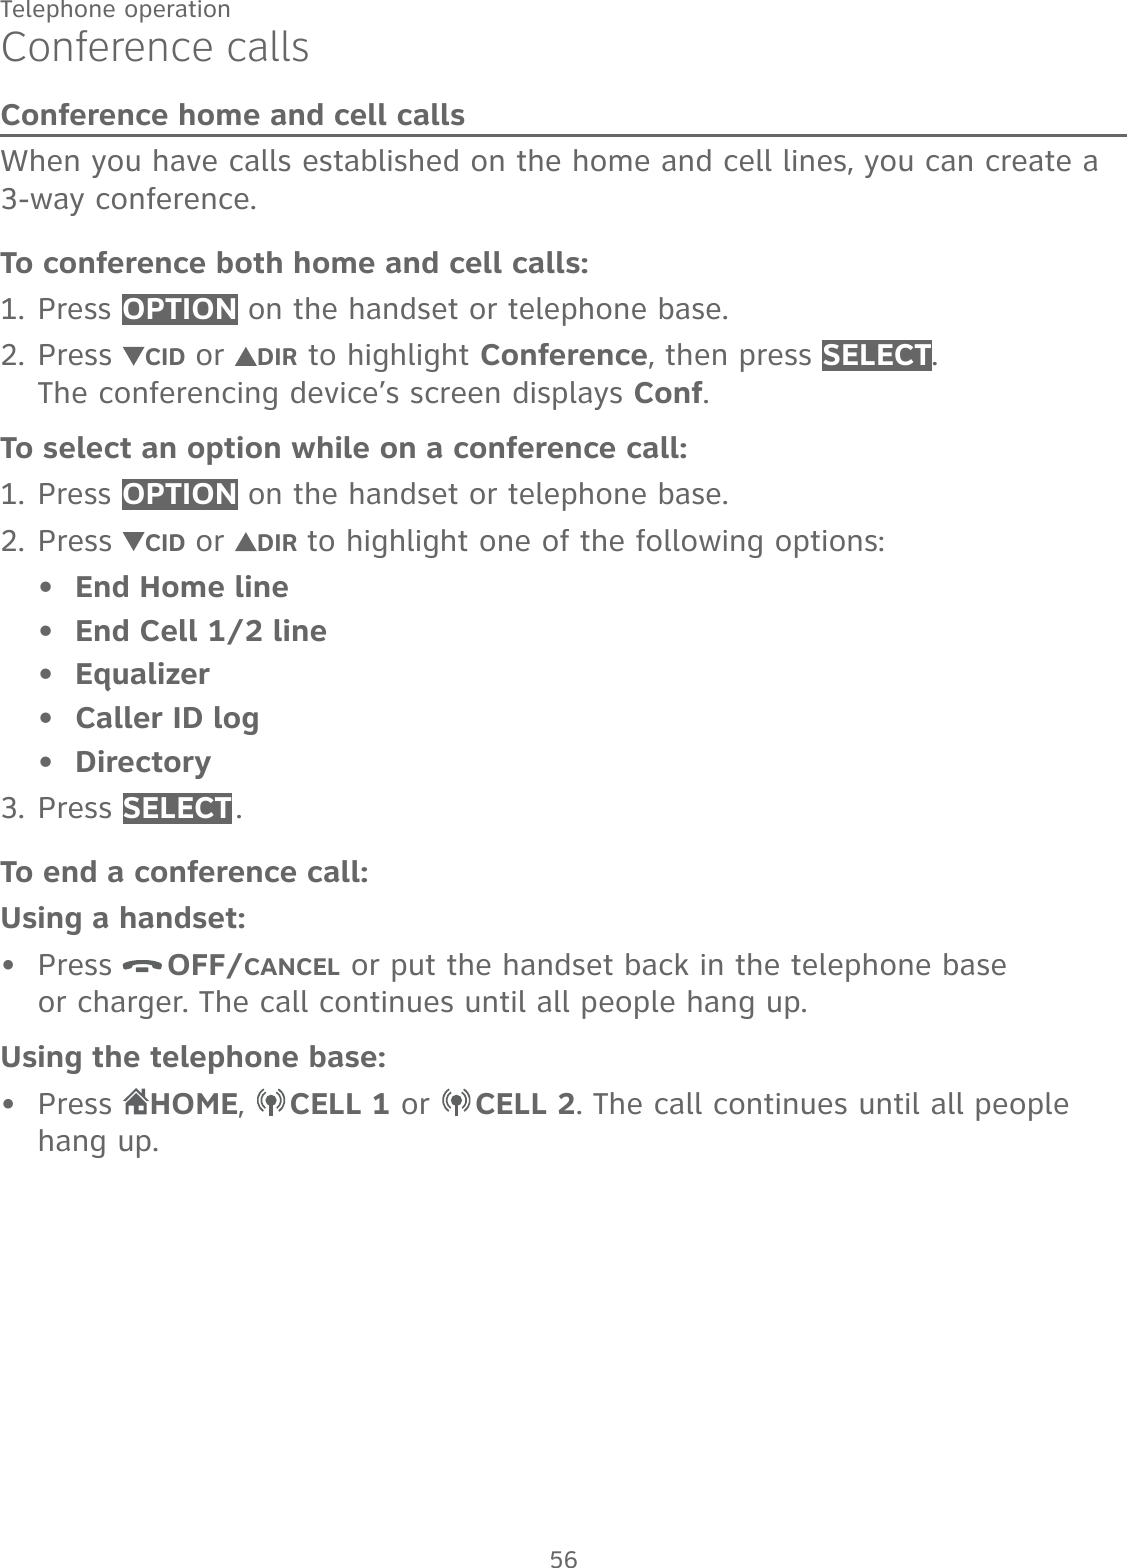 56Telephone operationConference callsConference home and cell callsWhen you have calls established on the home and cell lines, you can create a 3-way conference.To conference both home and cell calls:Press OPTION on the handset or telephone base.Press  CID or  DIR to highlight Conference, then press SELECT.  The conferencing device’s screen displays Conf.To select an option while on a conference call:Press OPTION on the handset or telephone base.Press  CID or  DIR to highlight one of the following options:End Home lineEnd Cell 1/2 lineEqualizerCaller ID logDirectoryPress SELECT .To end a conference call:Using a handset:Press  OFF/CANCEL or put the handset back in the telephone base  or charger. The call continues until all people hang up.Using the telephone base:Press  HOME,  CELL 1 or  CELL 2. The call continues until all people  hang up.1.2.1.2.•••••3.••